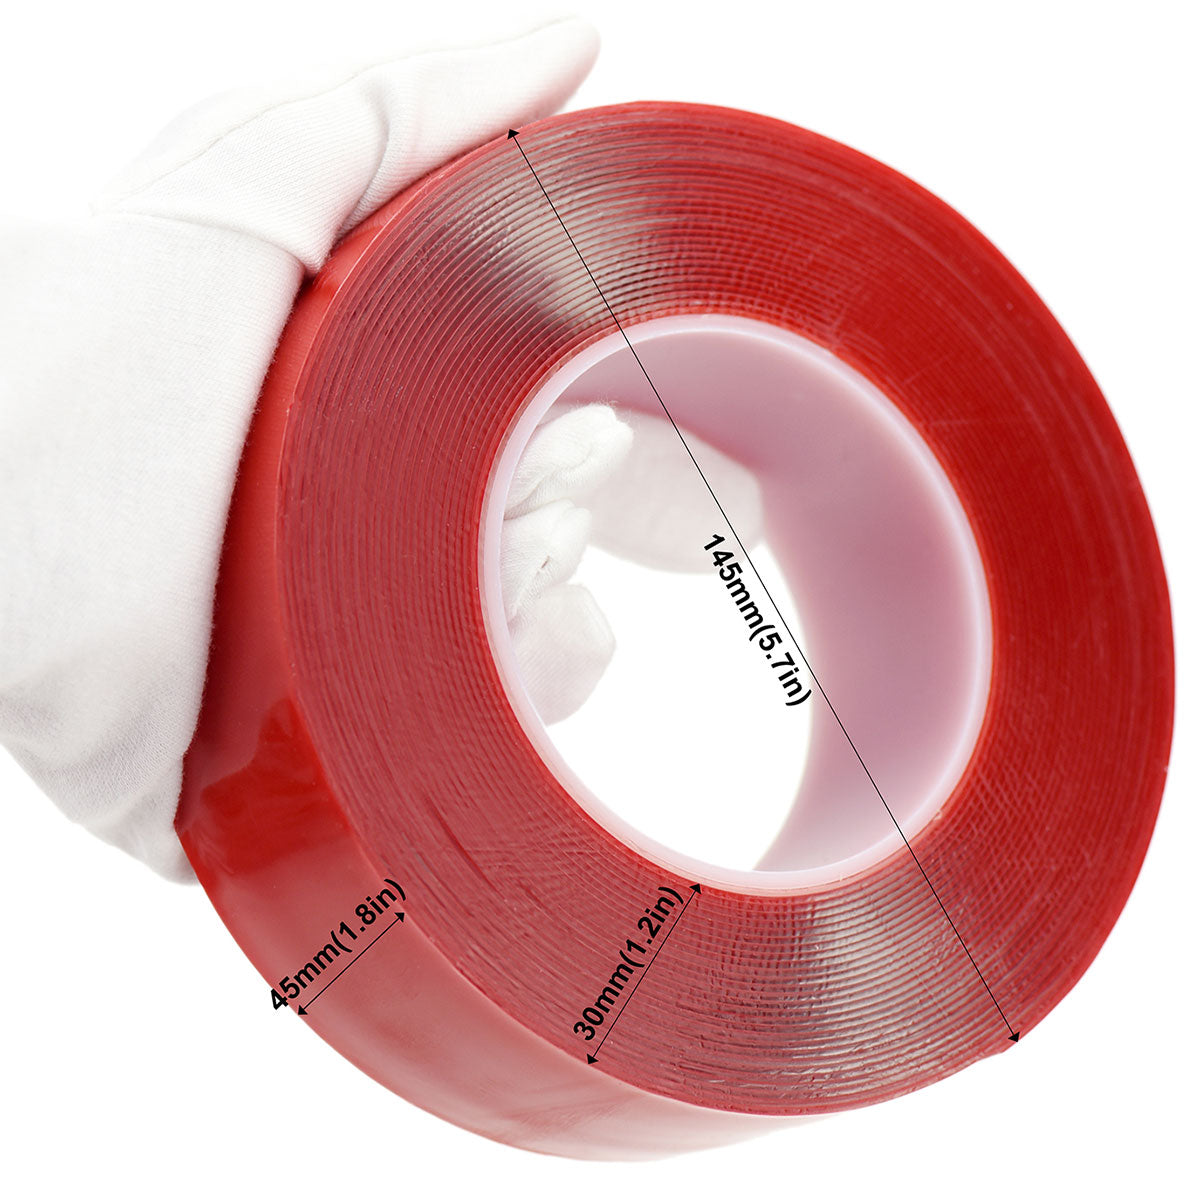 45mm x 1mm x 10 meters Multi-Purpose High Strength Transparent Acrylic Gel Adhesive Double Sided Tape Roll No Residue